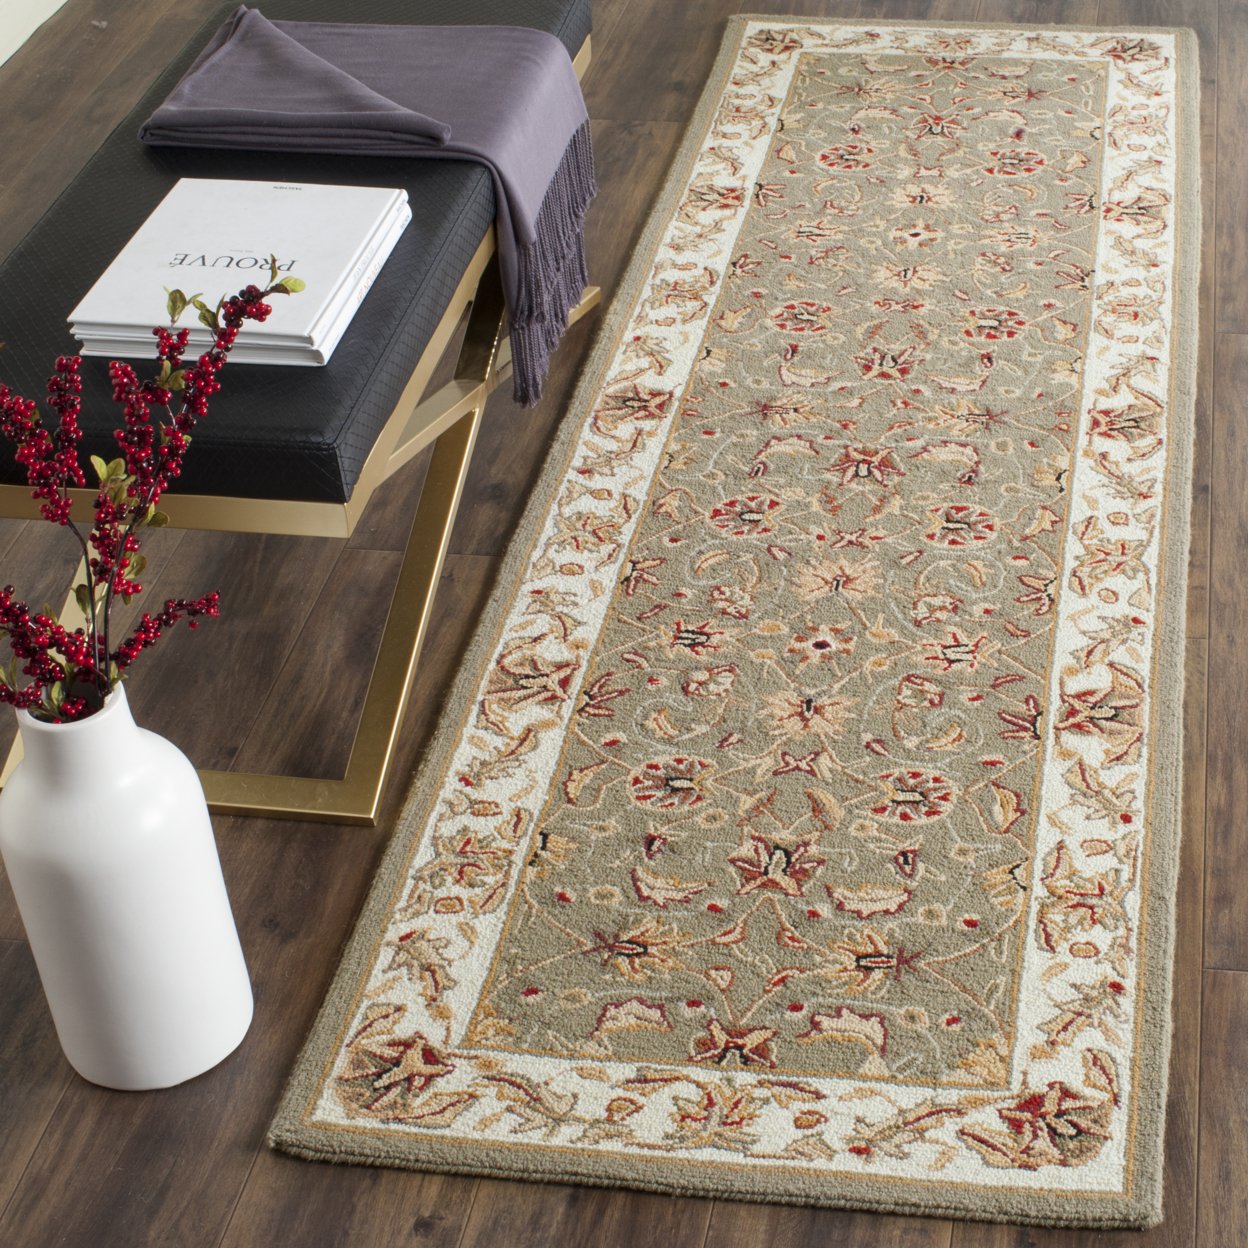 SAFAVIEH Chelsea HK78D Hand-hooked Taupe / Ivory Rug - 4' 6 X 6' 6 Oval